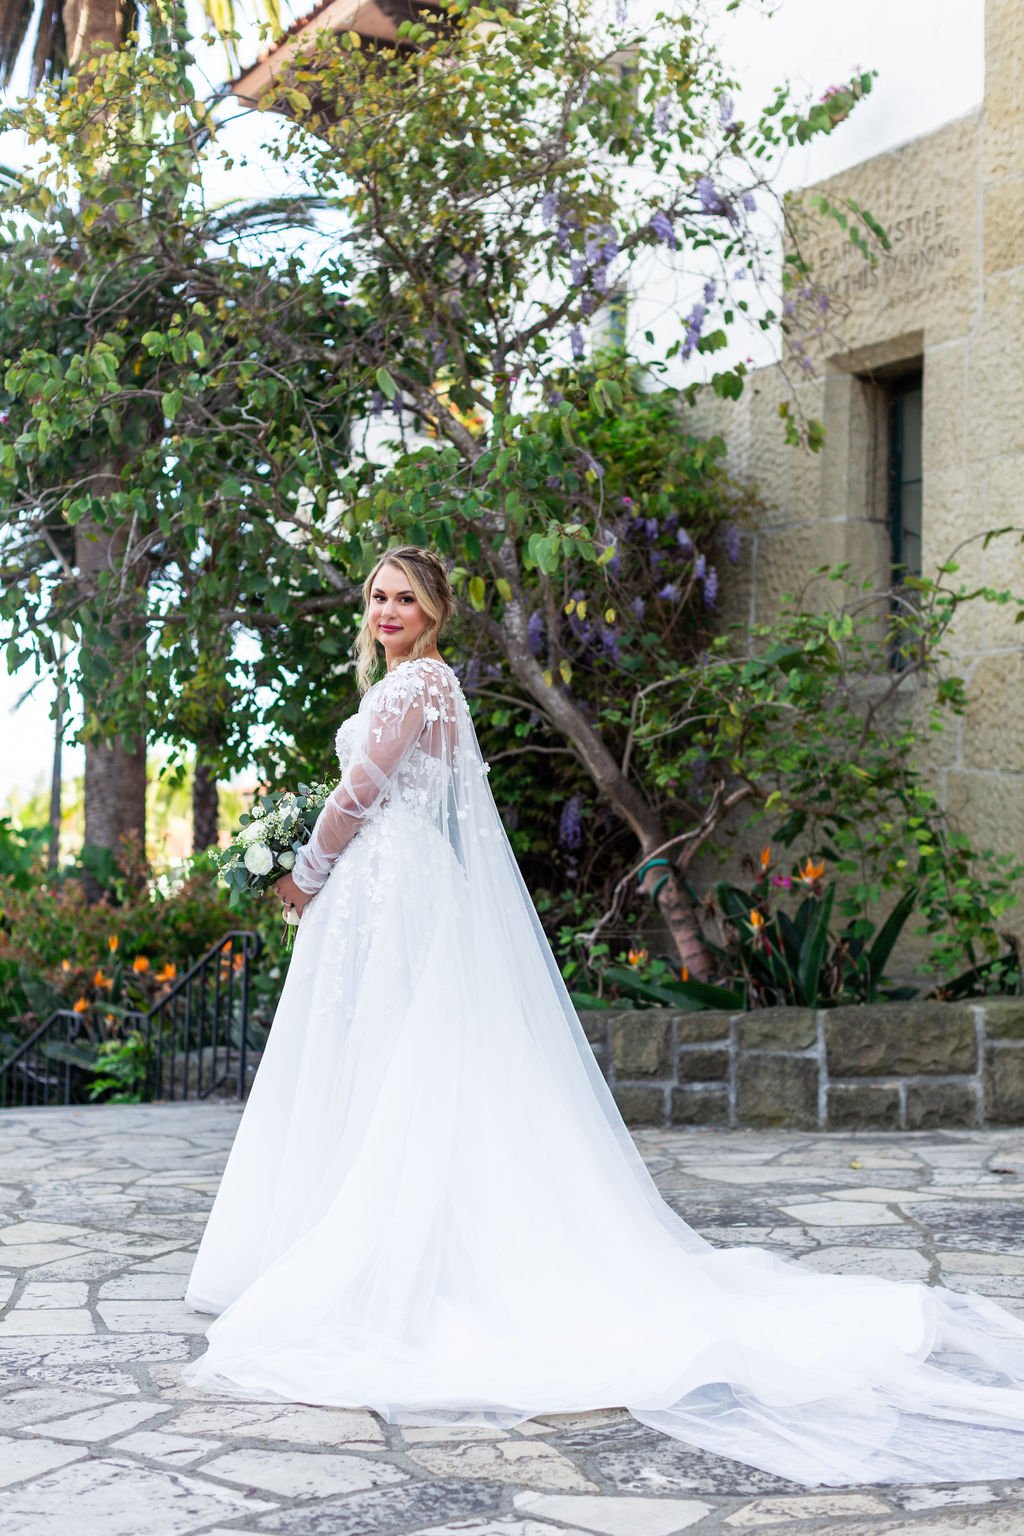 www.santabarbarawedding.com | Weddings by the Sea | Santa Barbara Courthouse | Kevin Qian | Cate Forest Designs | Bride in Gown Before Ceremony